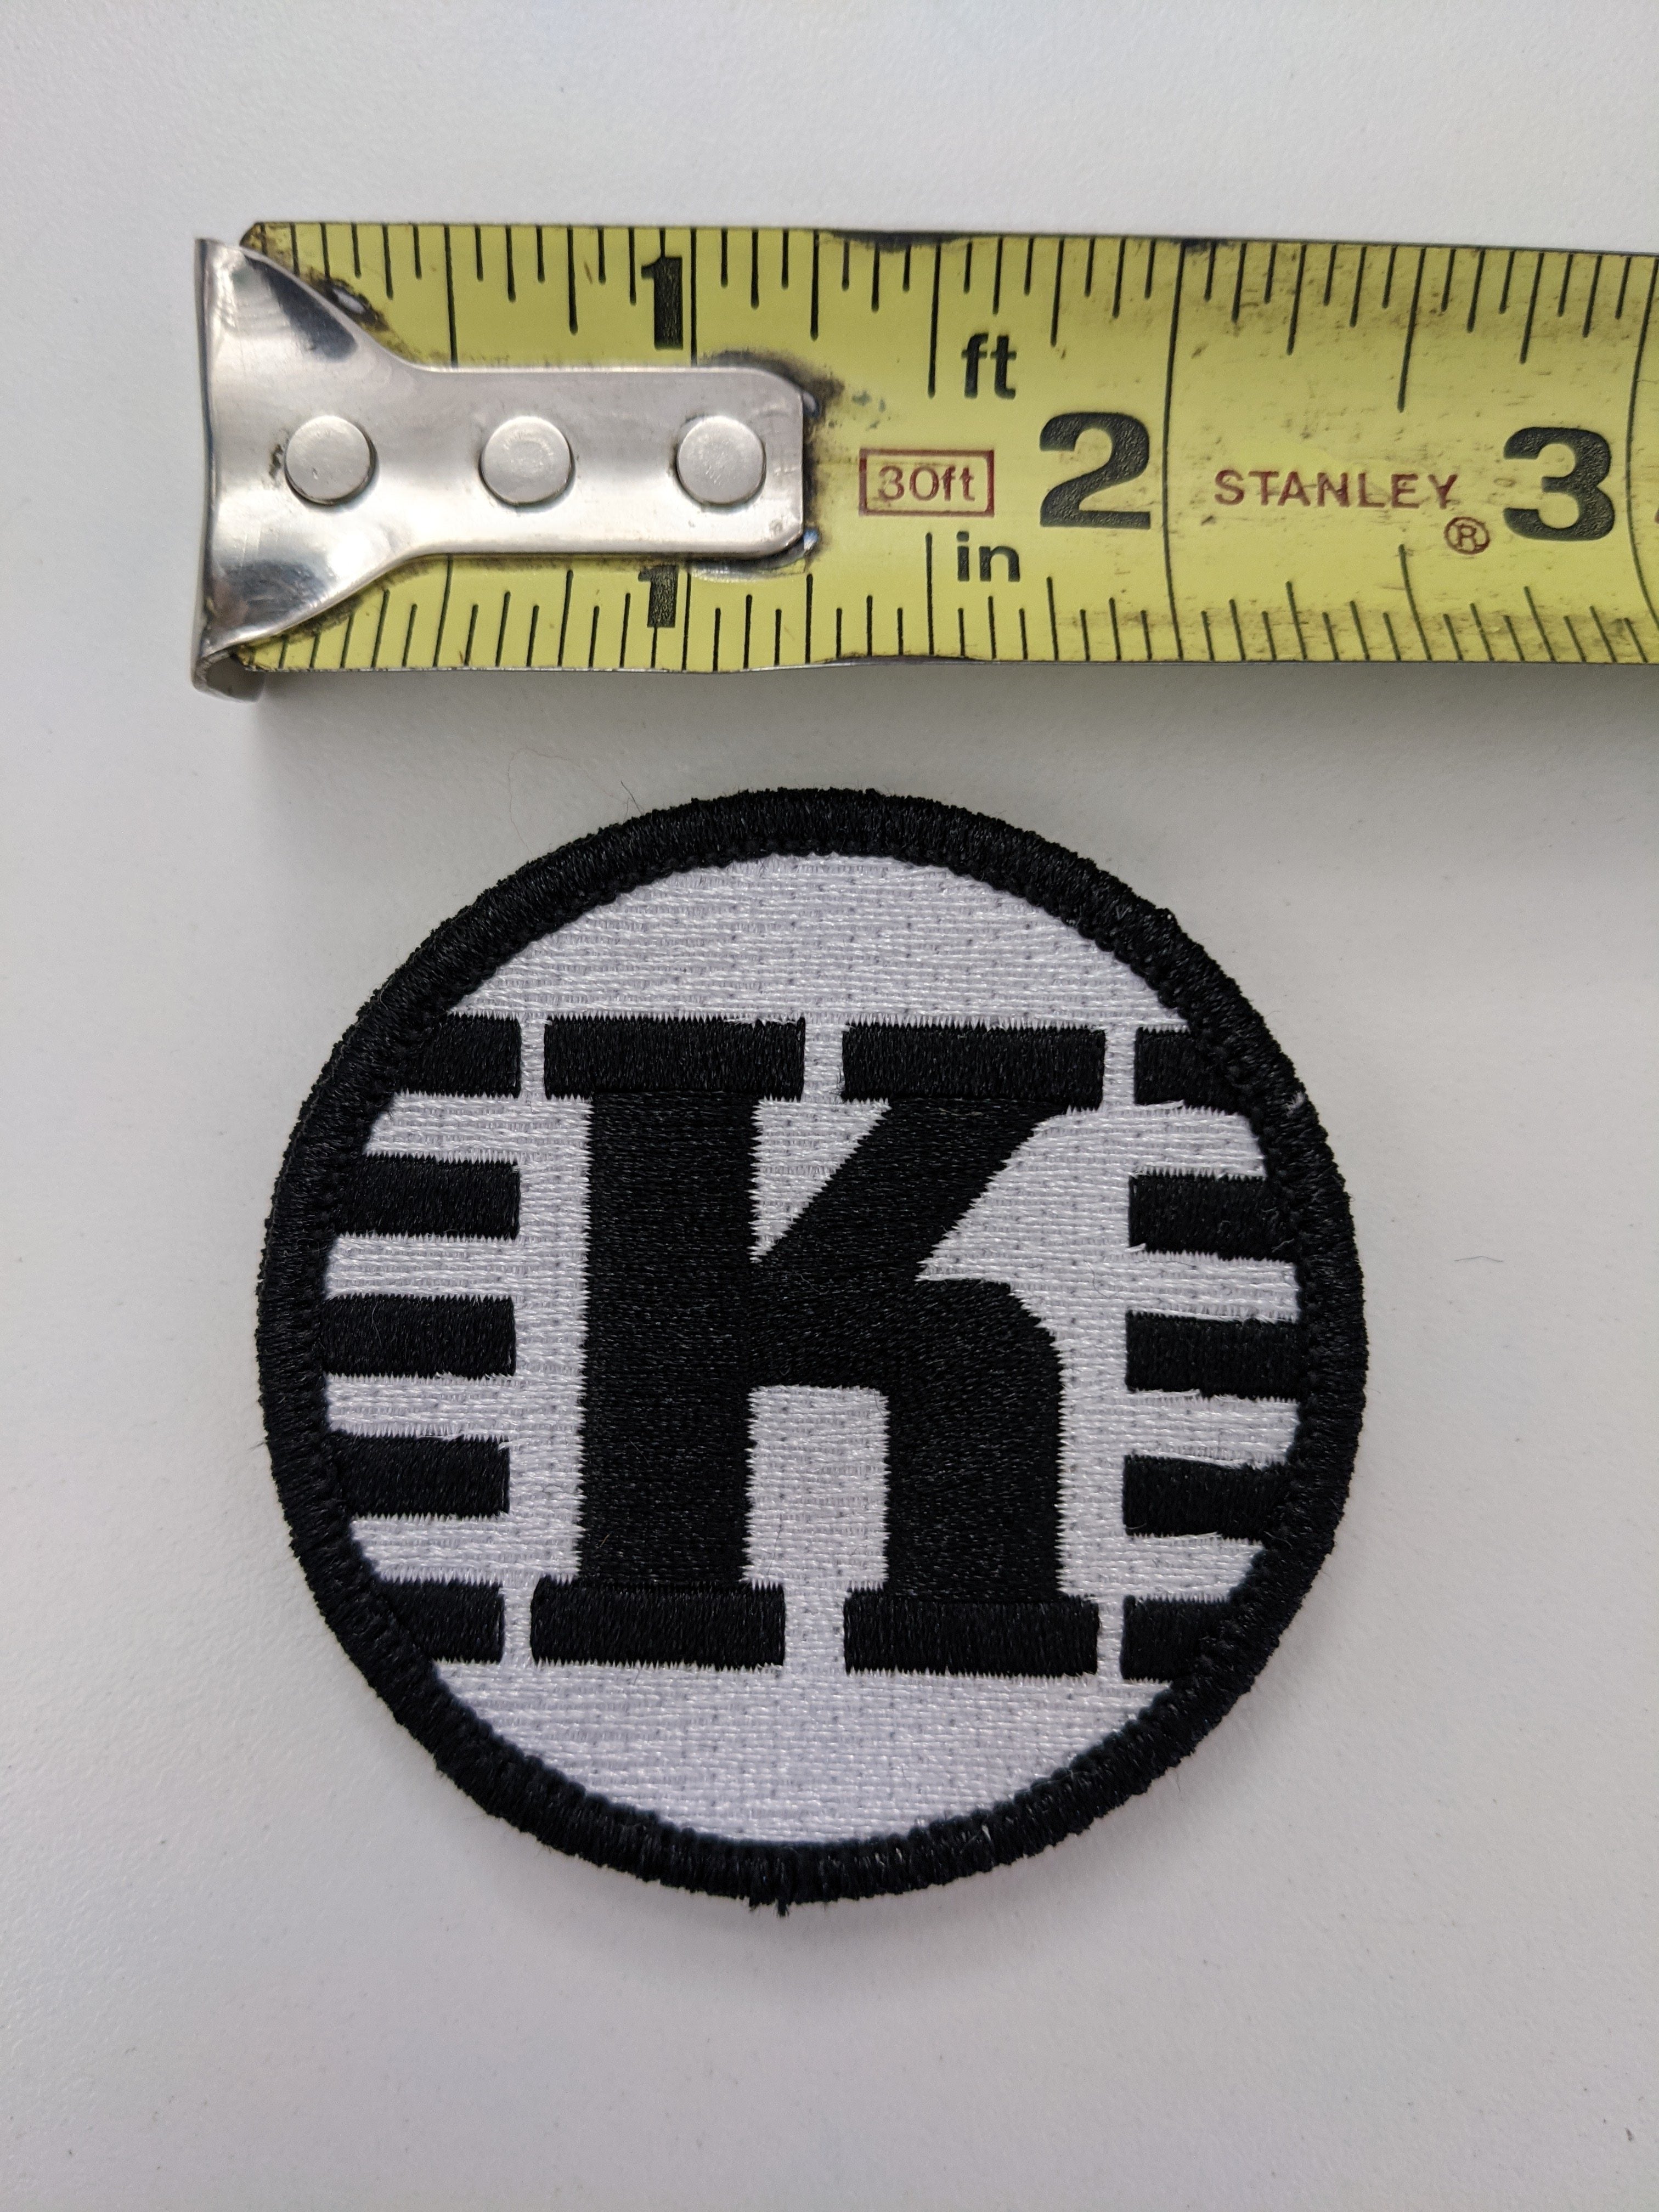 Kastaplast Disc Golf Sew on Patches